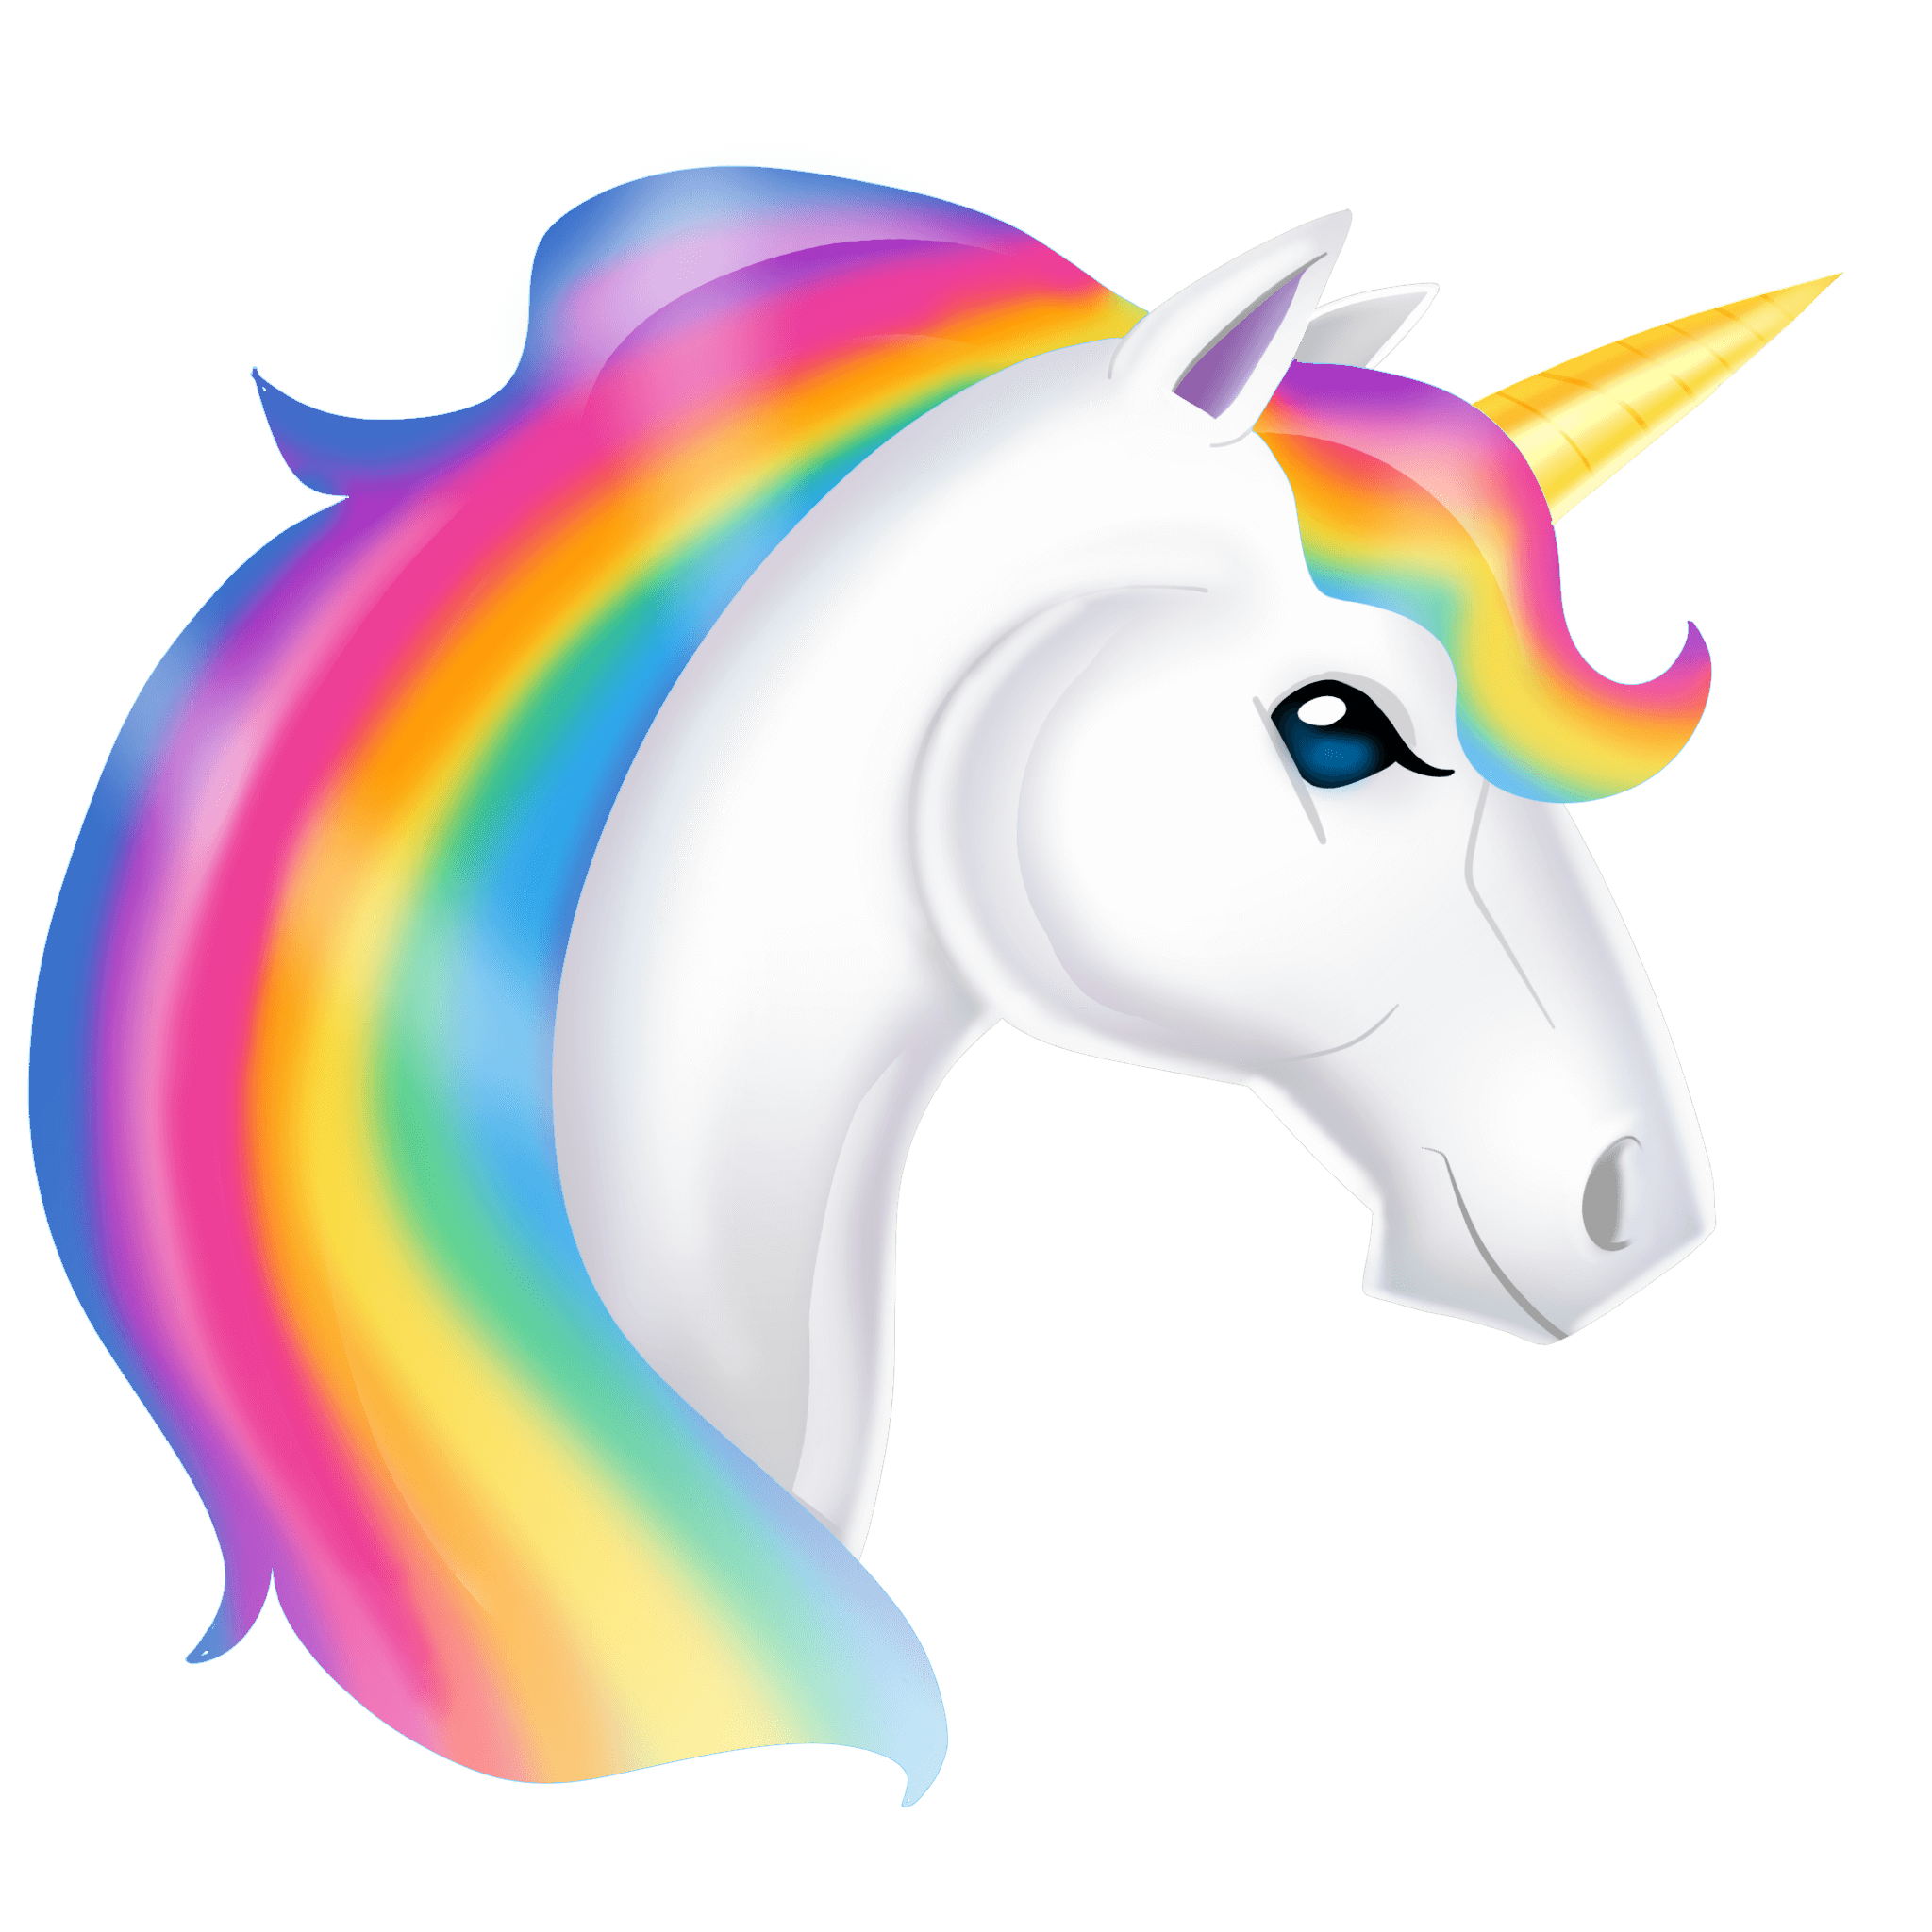 Download Free Unicorn Png Images Download Unicorn Png Free